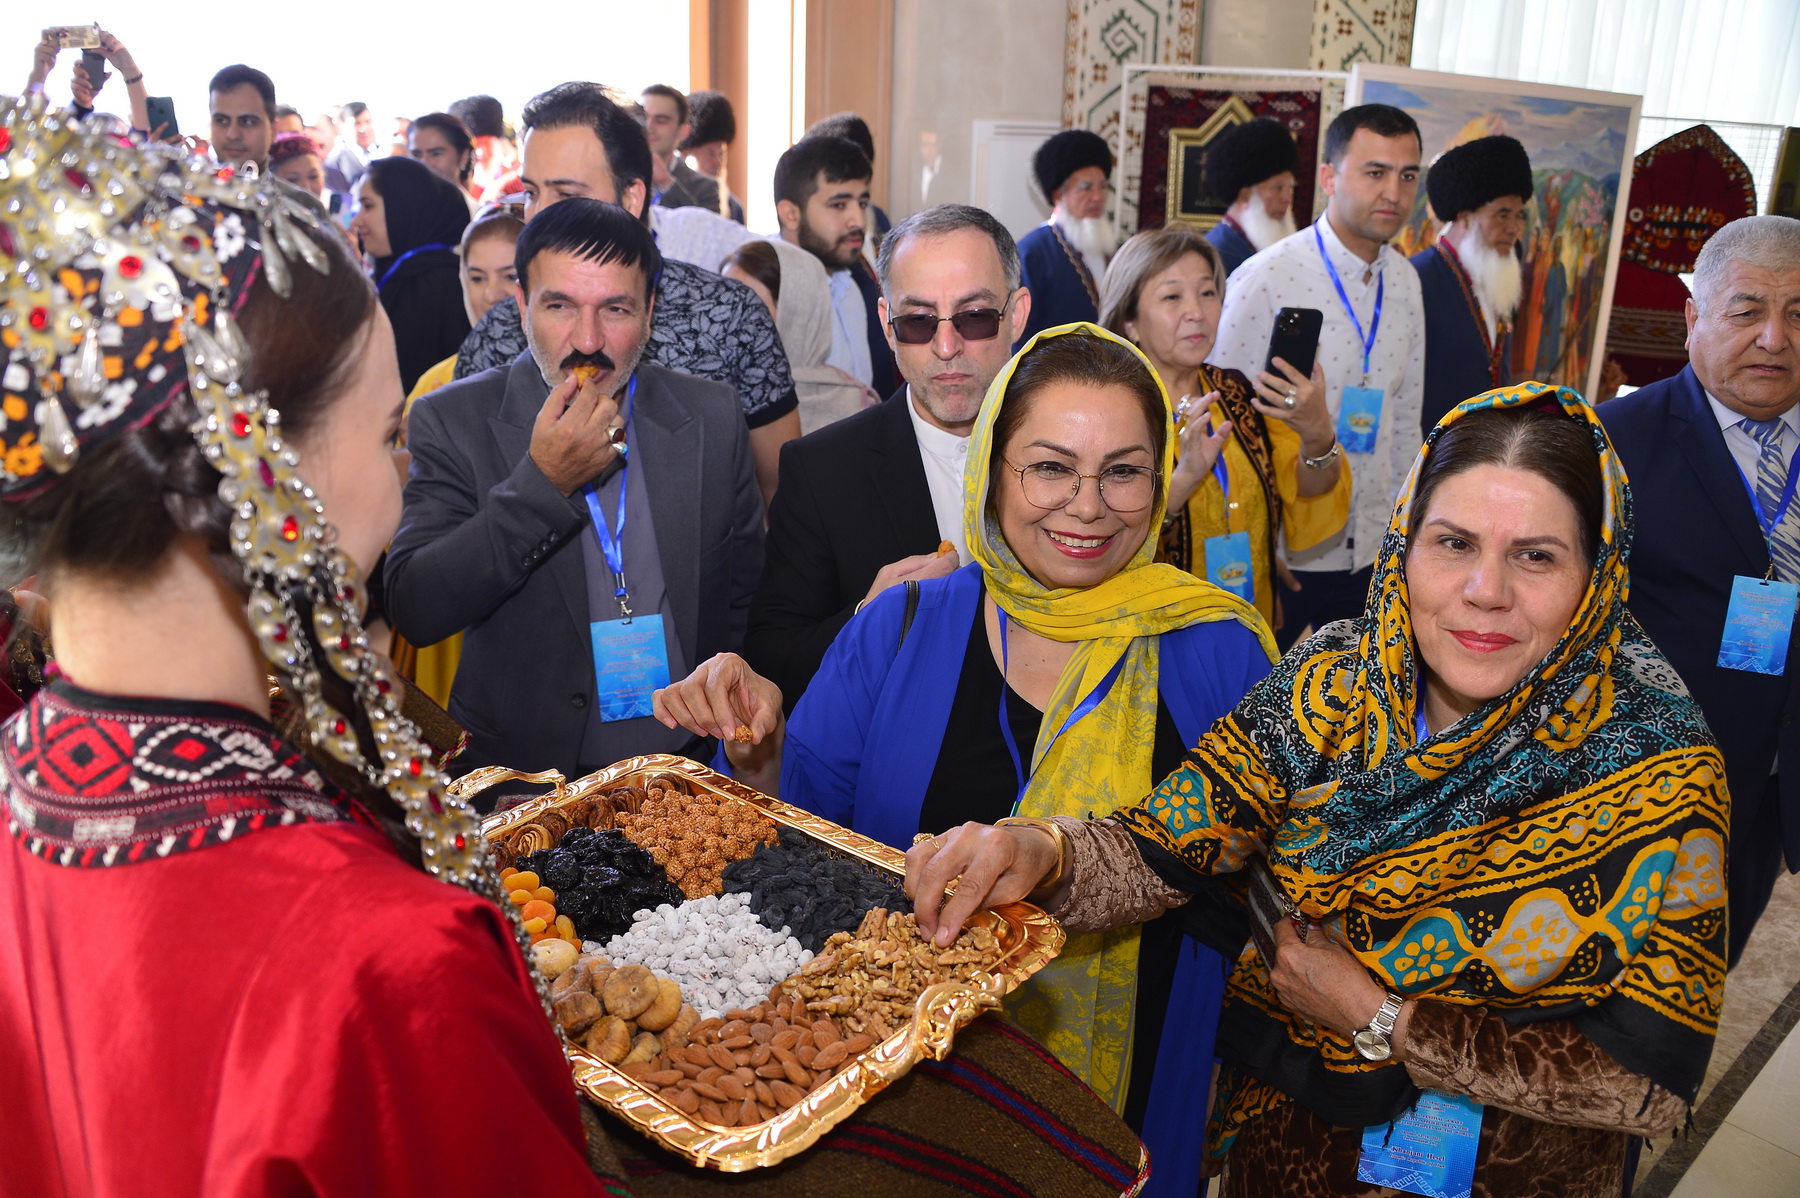 An International Thematic Festival Is Being Held In Turkmenistan